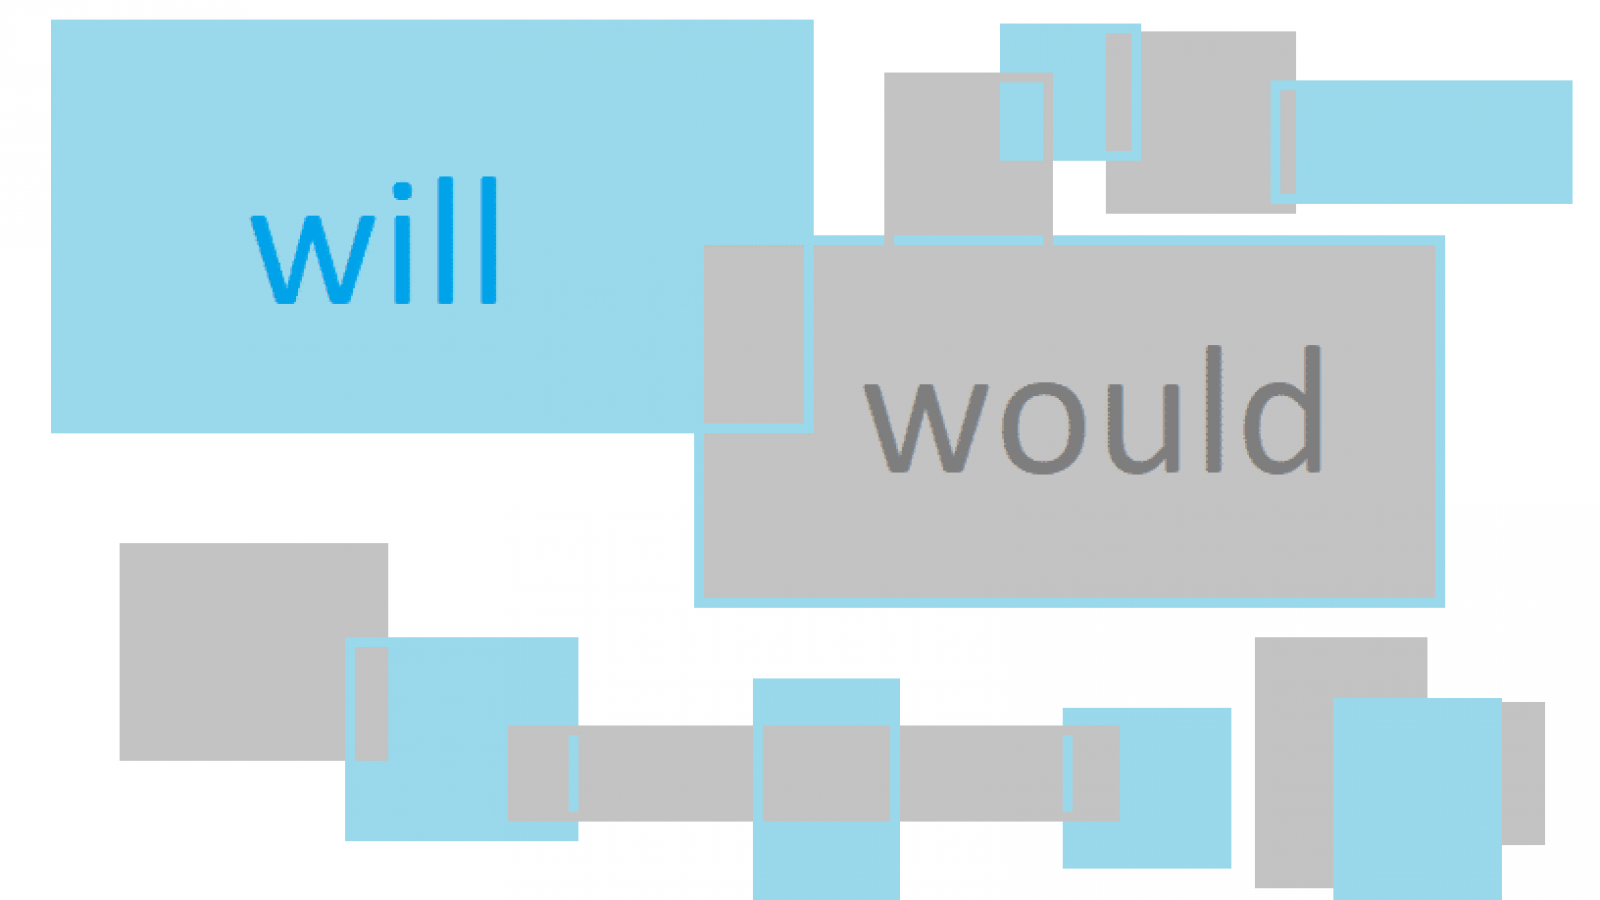 modal verb در زبان انگلیسی » will\would